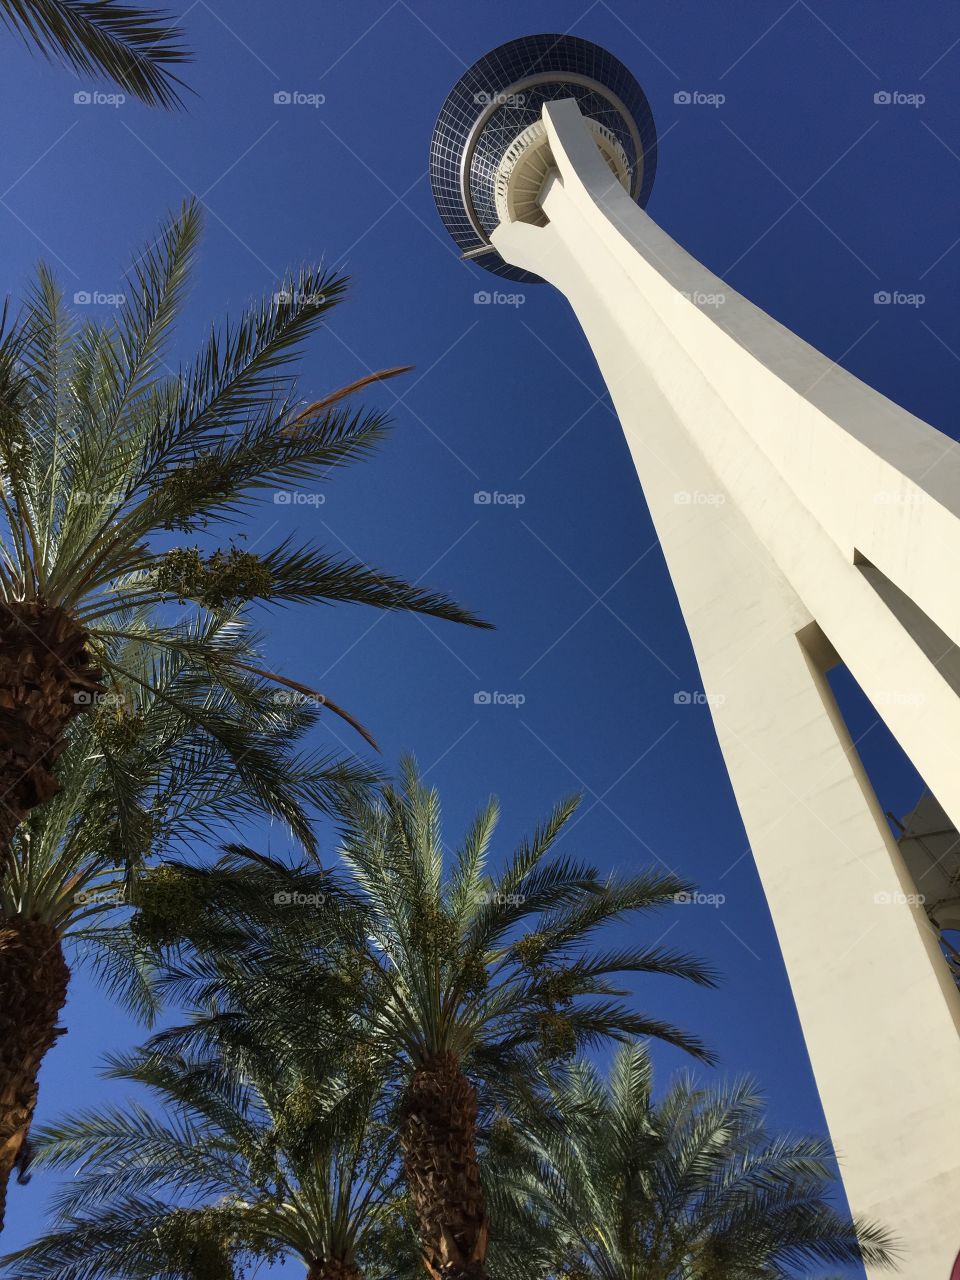 Stratosphere tower hotel
